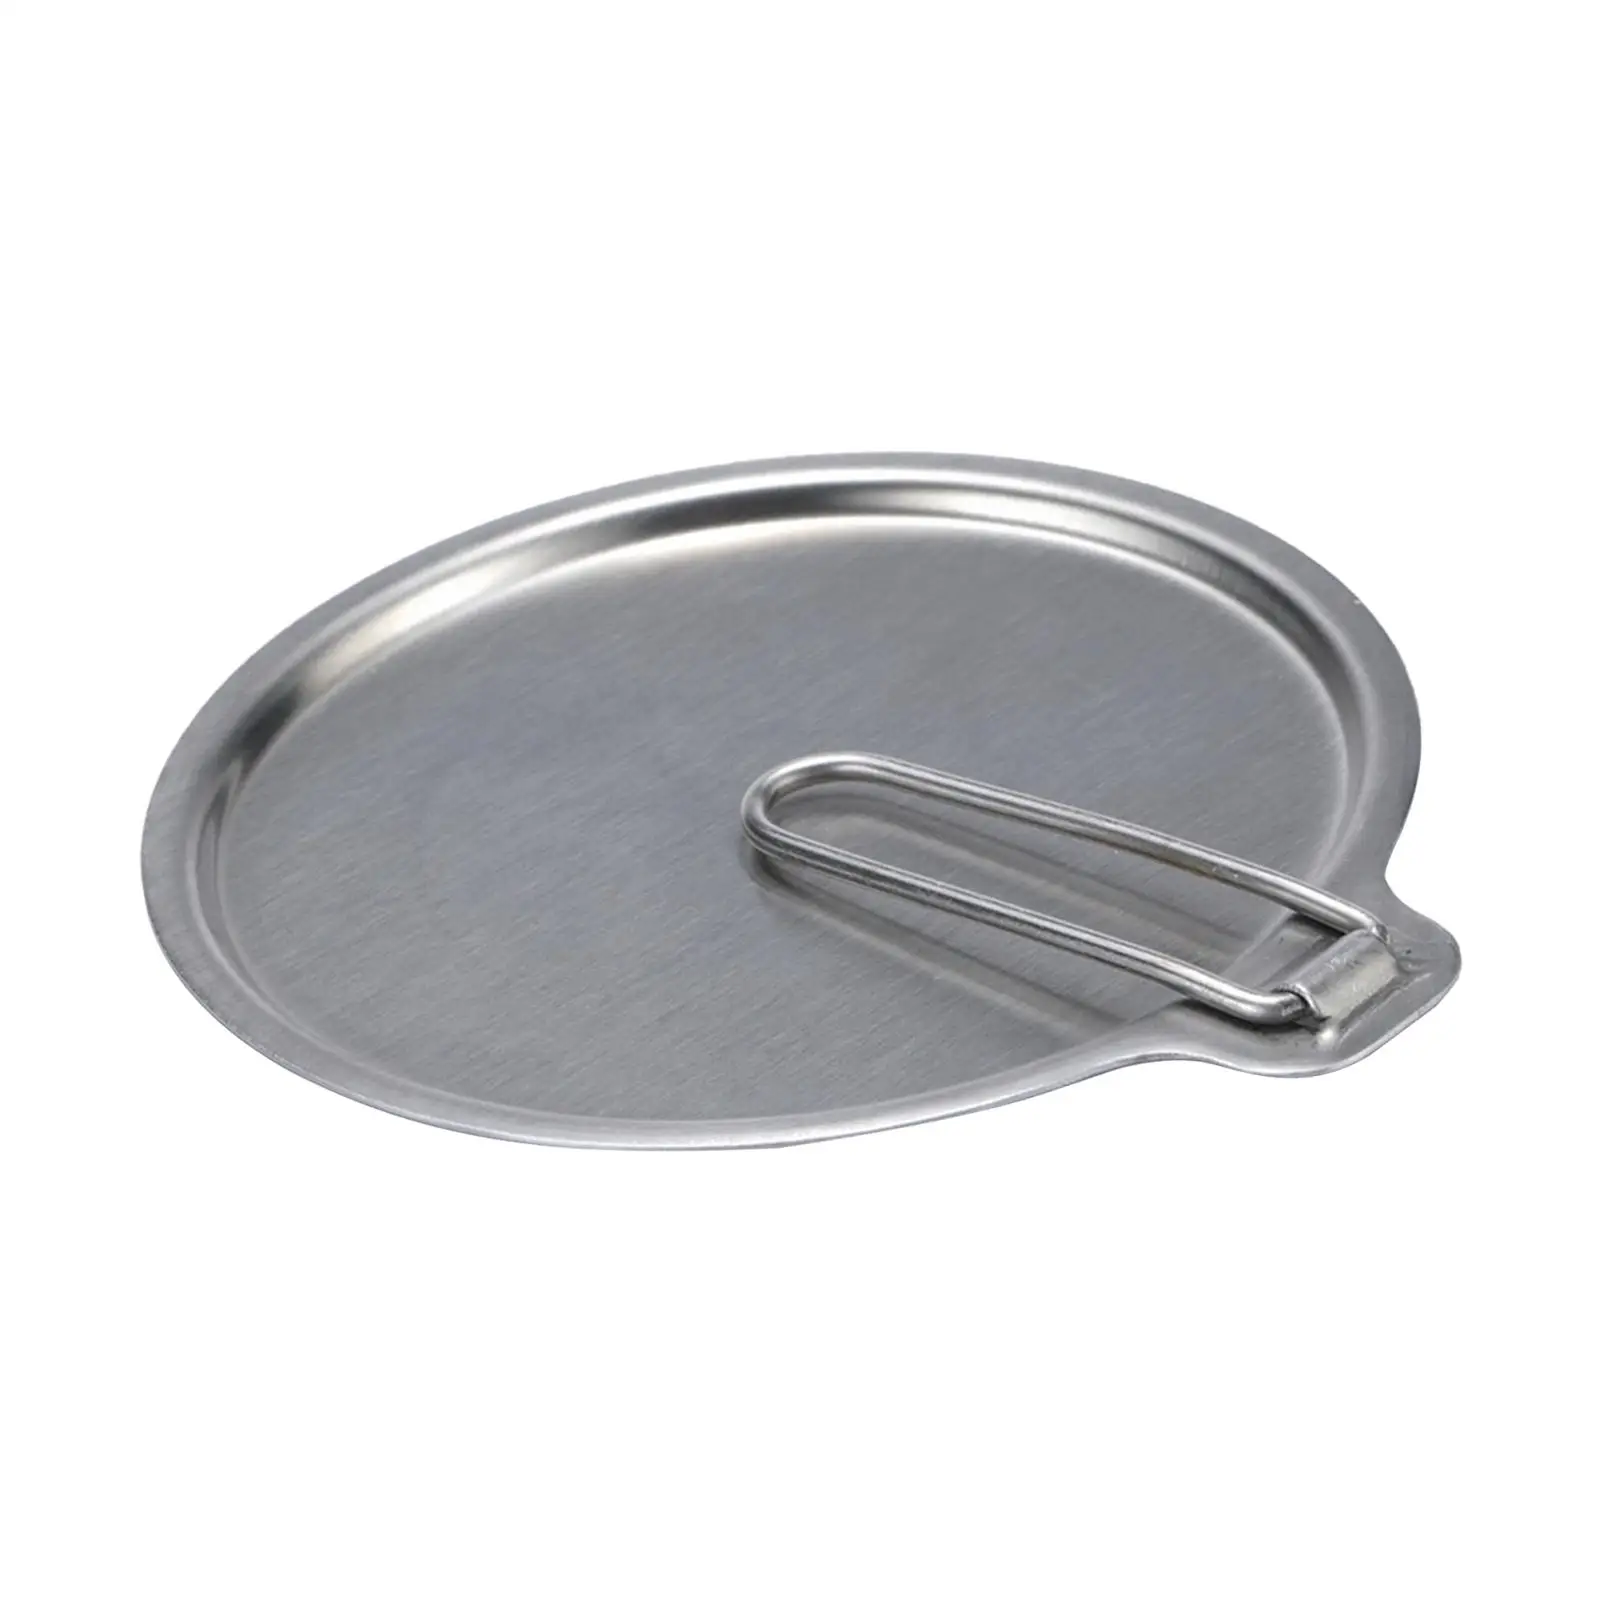 Dia 12.7cm Camping Pot Lid Bowl Dish Cover Flatware Tableware Cooking Pan Lids for Travelling Backpacking Hiking Kitchen Outdoor